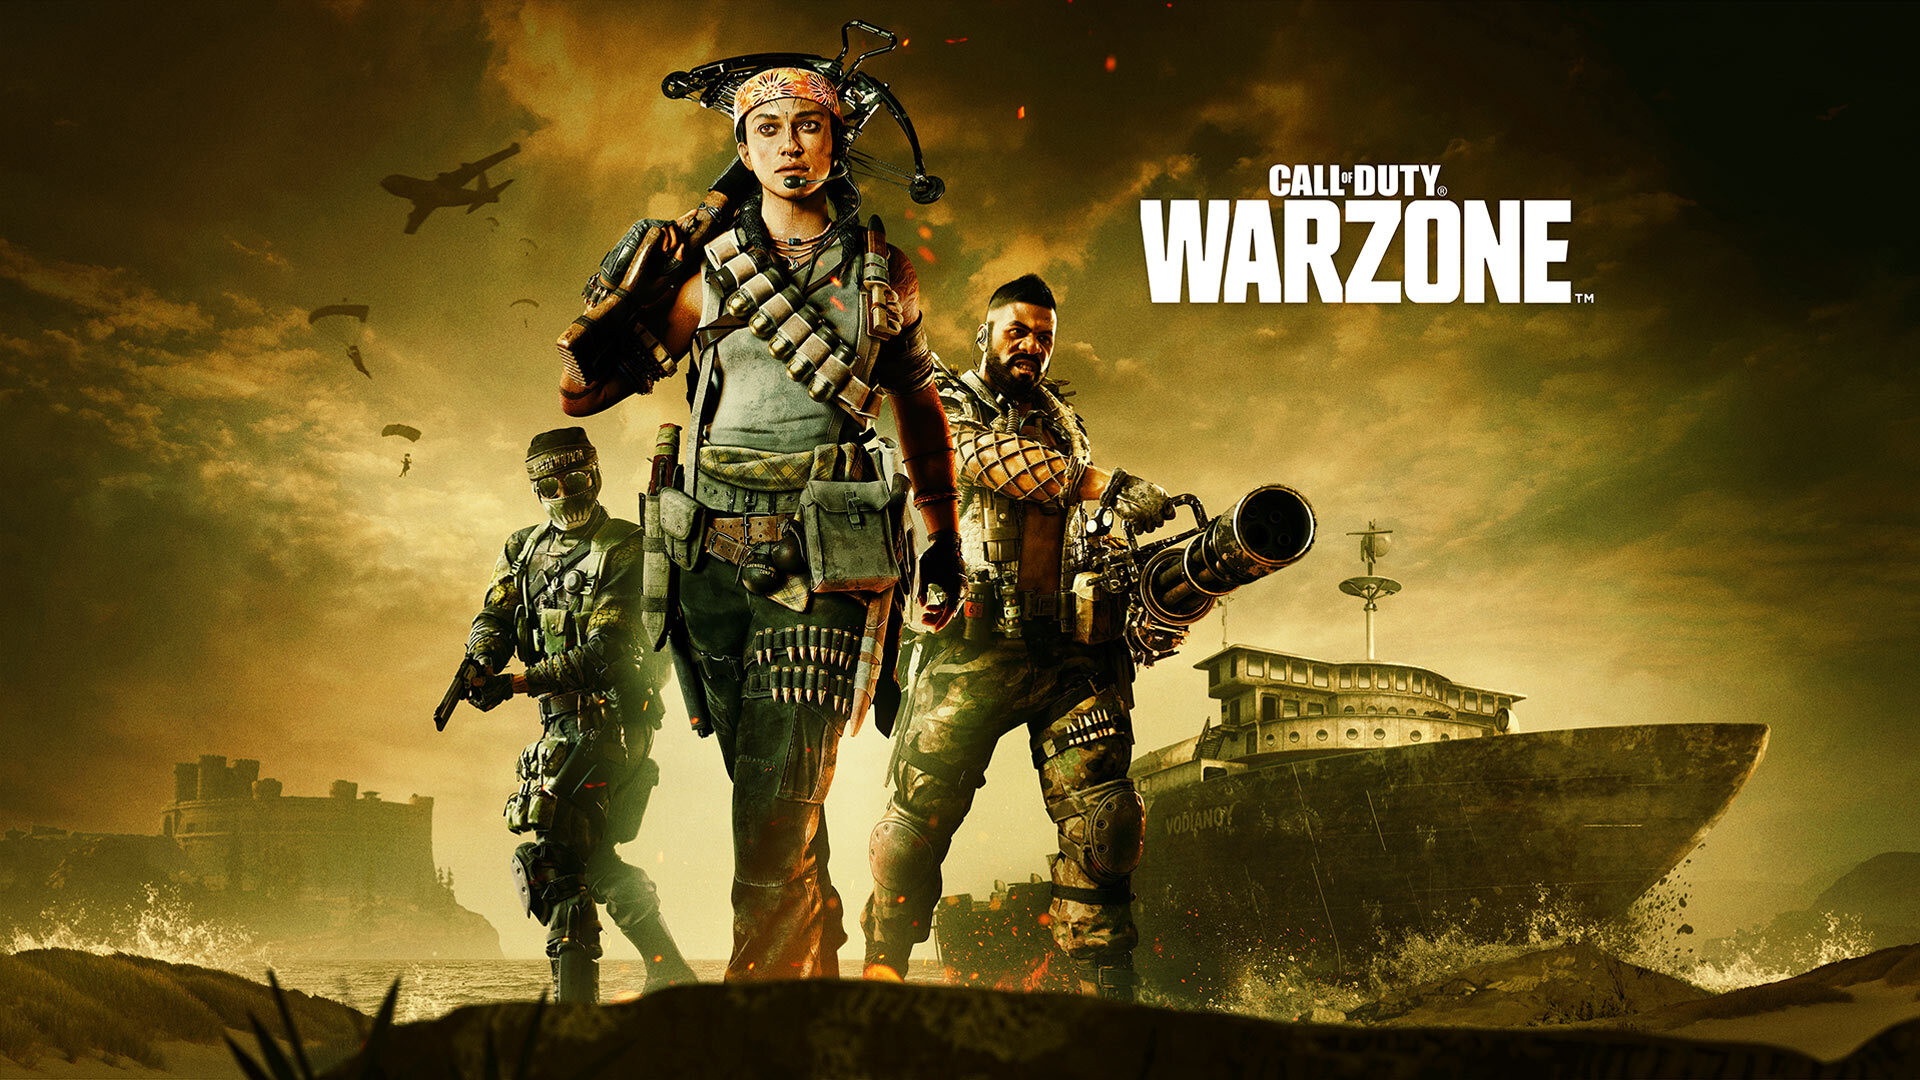 When Does Call of Duty: Warzone 2 Come Out? Warzone 2.0 Release Date and Leaks